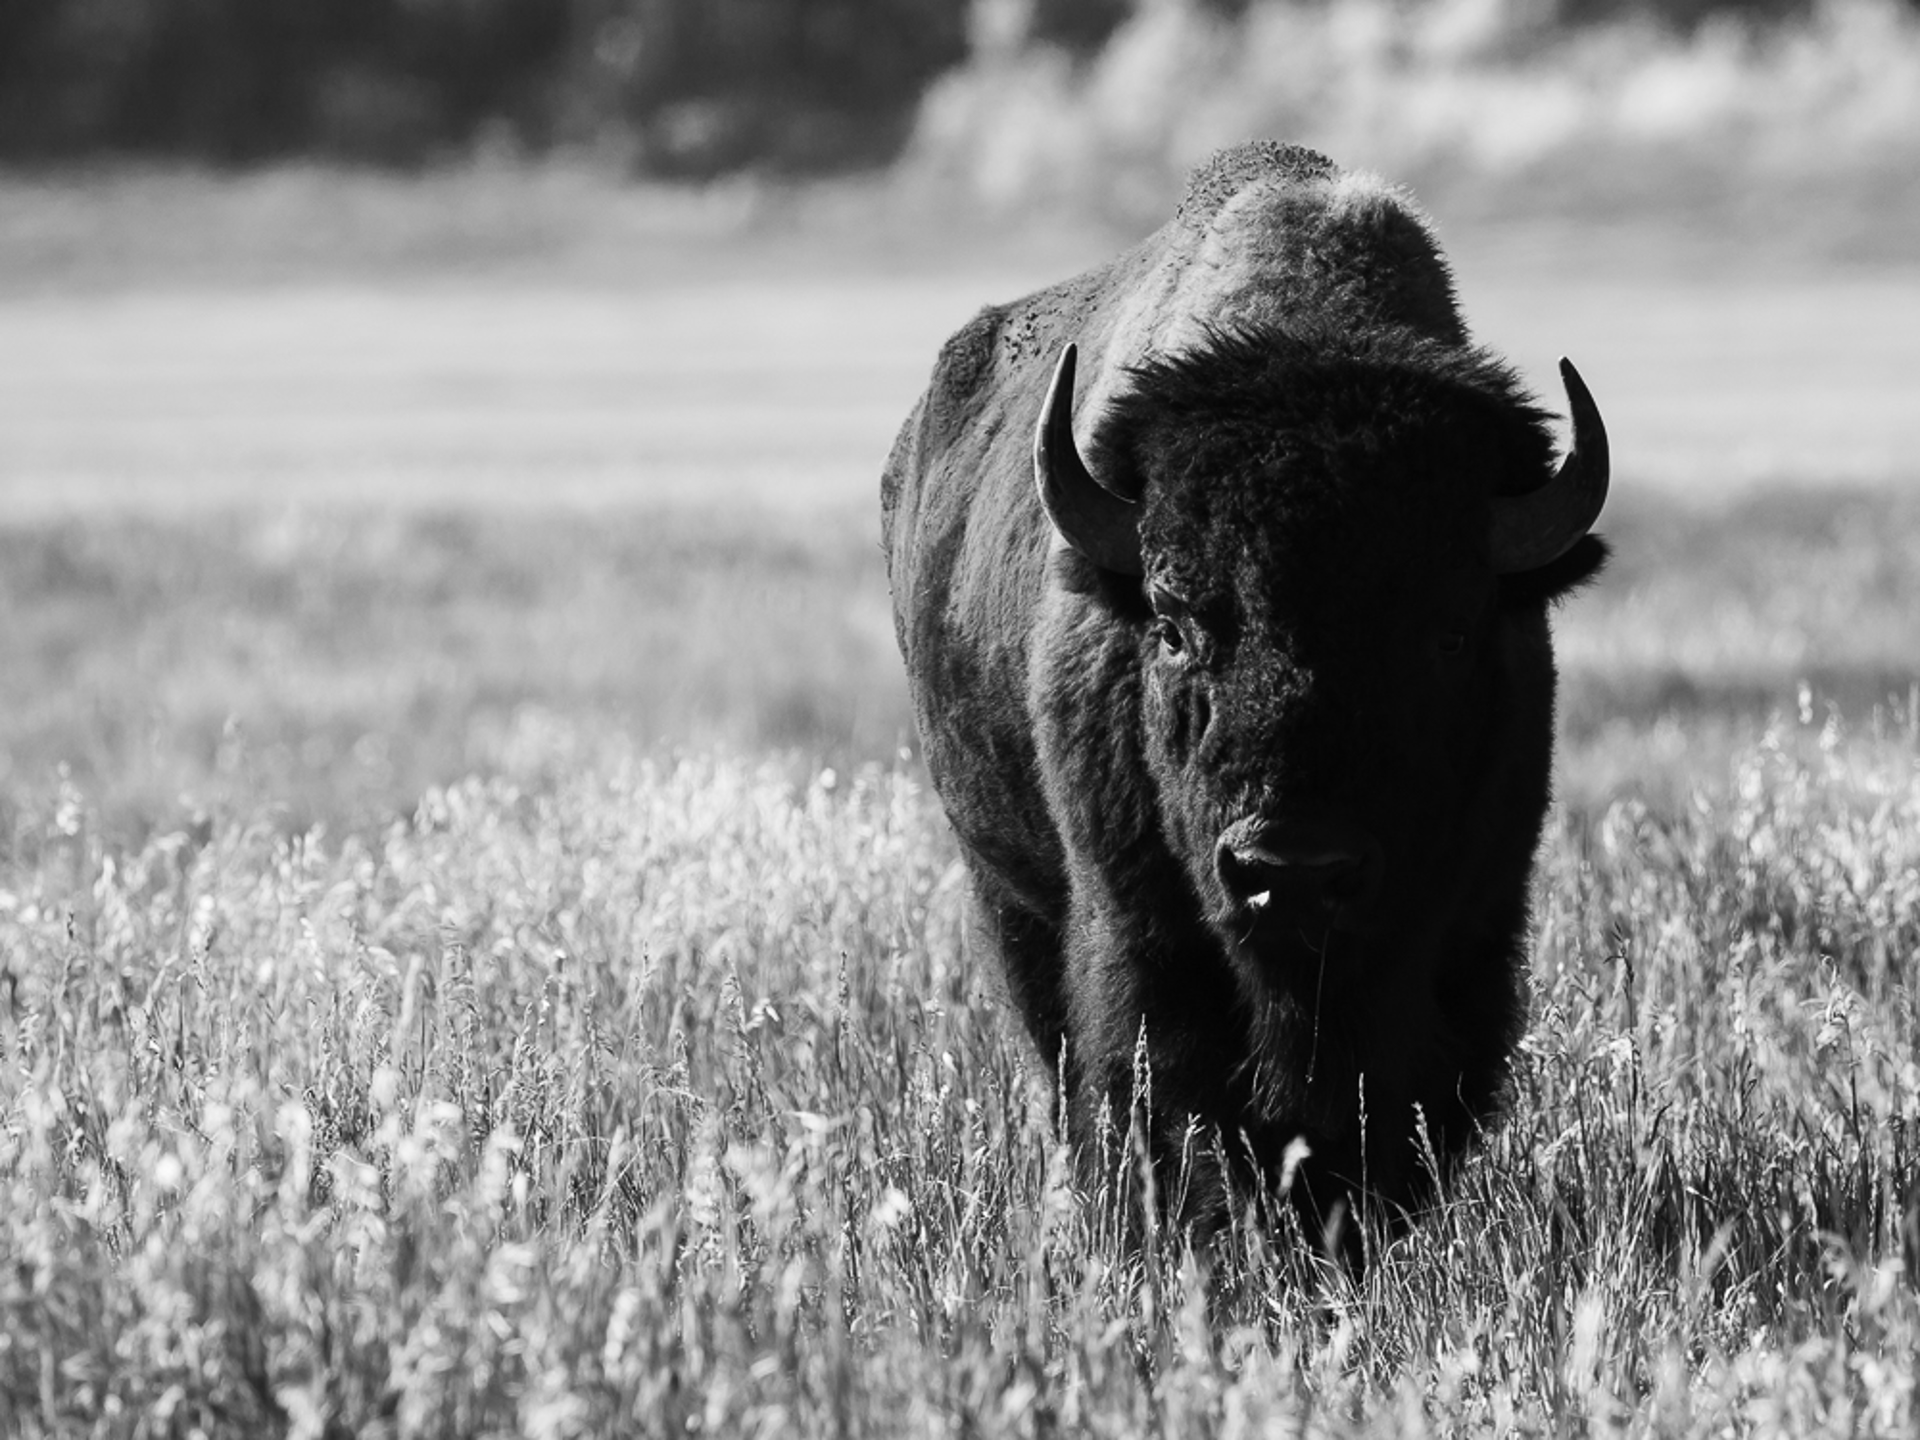 A Bull Bison Walks Towards You Through Dry Tall Grass With Dramatic Lighting, Black And White Wildlife Photography on Acid Free Hahnemule Bamboo Paper, By Jason Williams